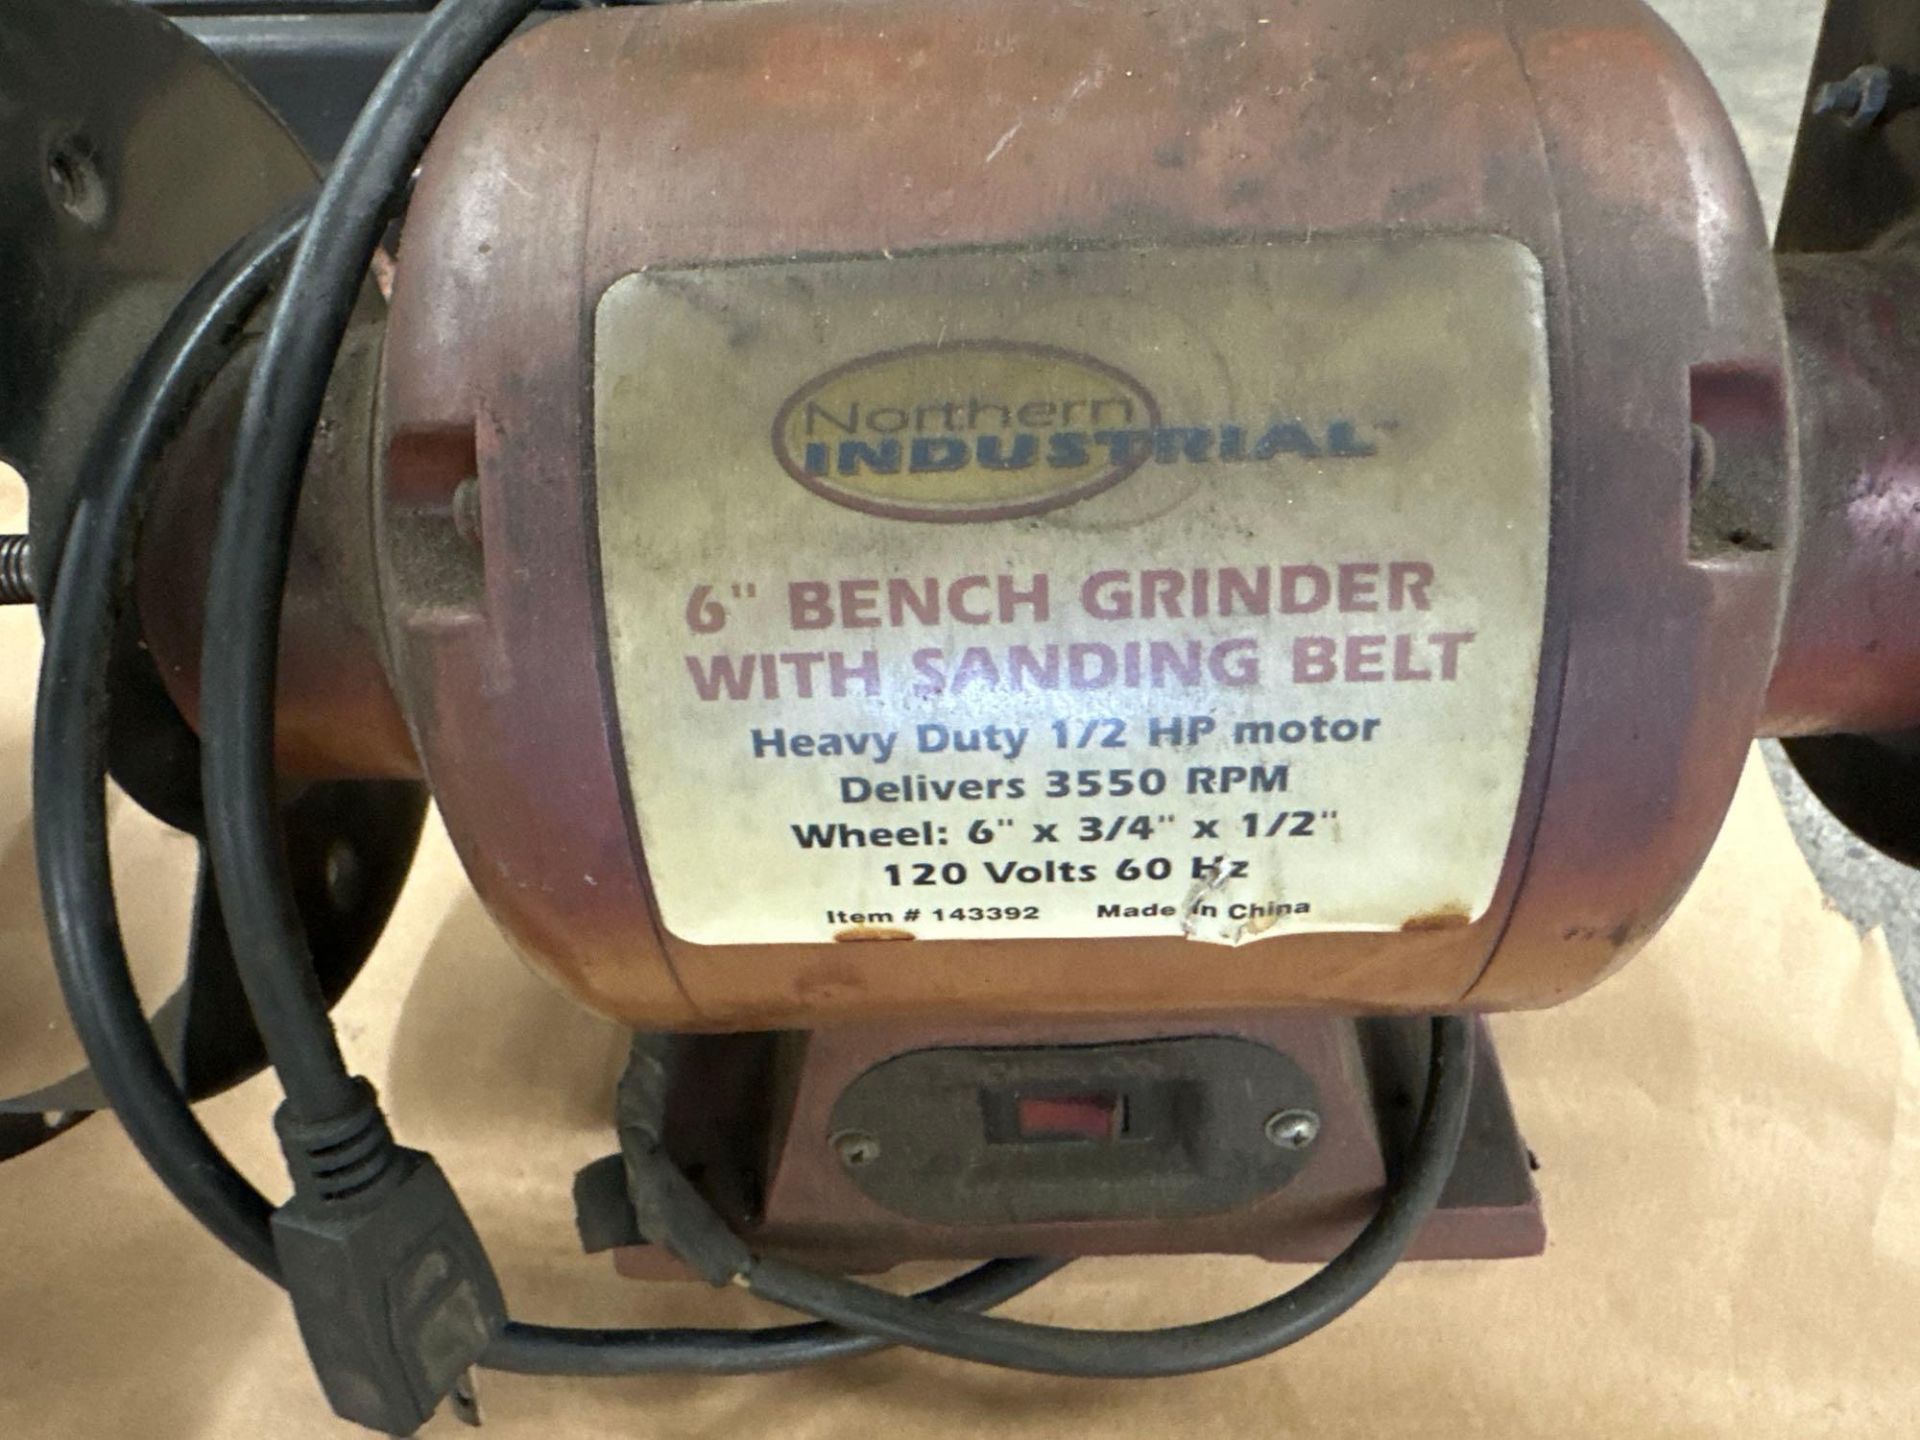 6” North Industrial with Sanding Belt, S/N 143392 - Image 5 of 5